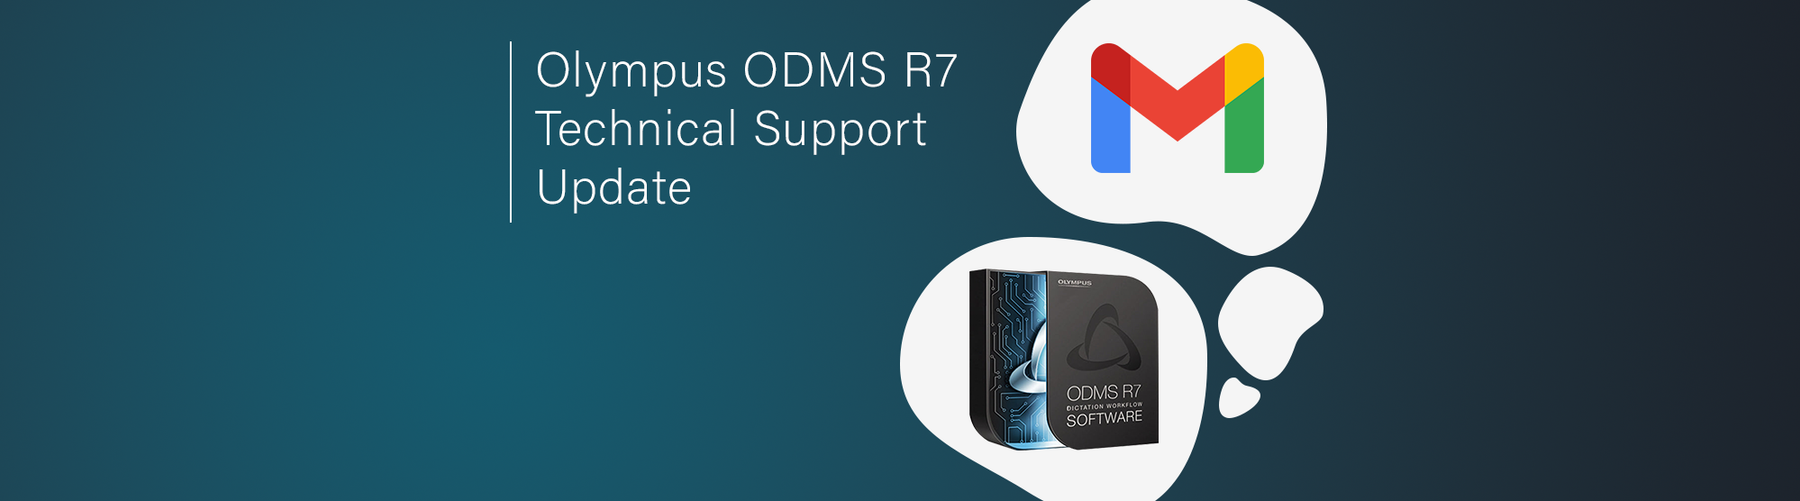 ODMS R7 Technical Support Update